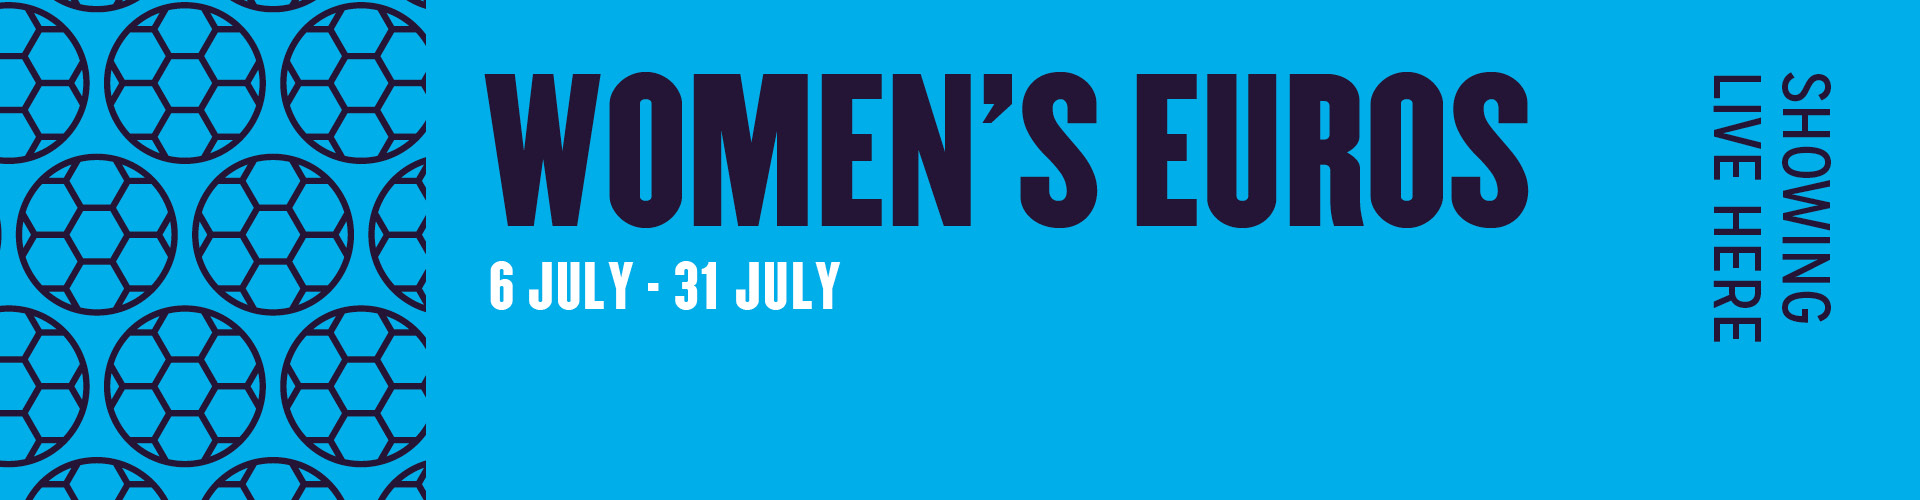 Women's Euros - Catch Every Game Live Here. 6th-31st July